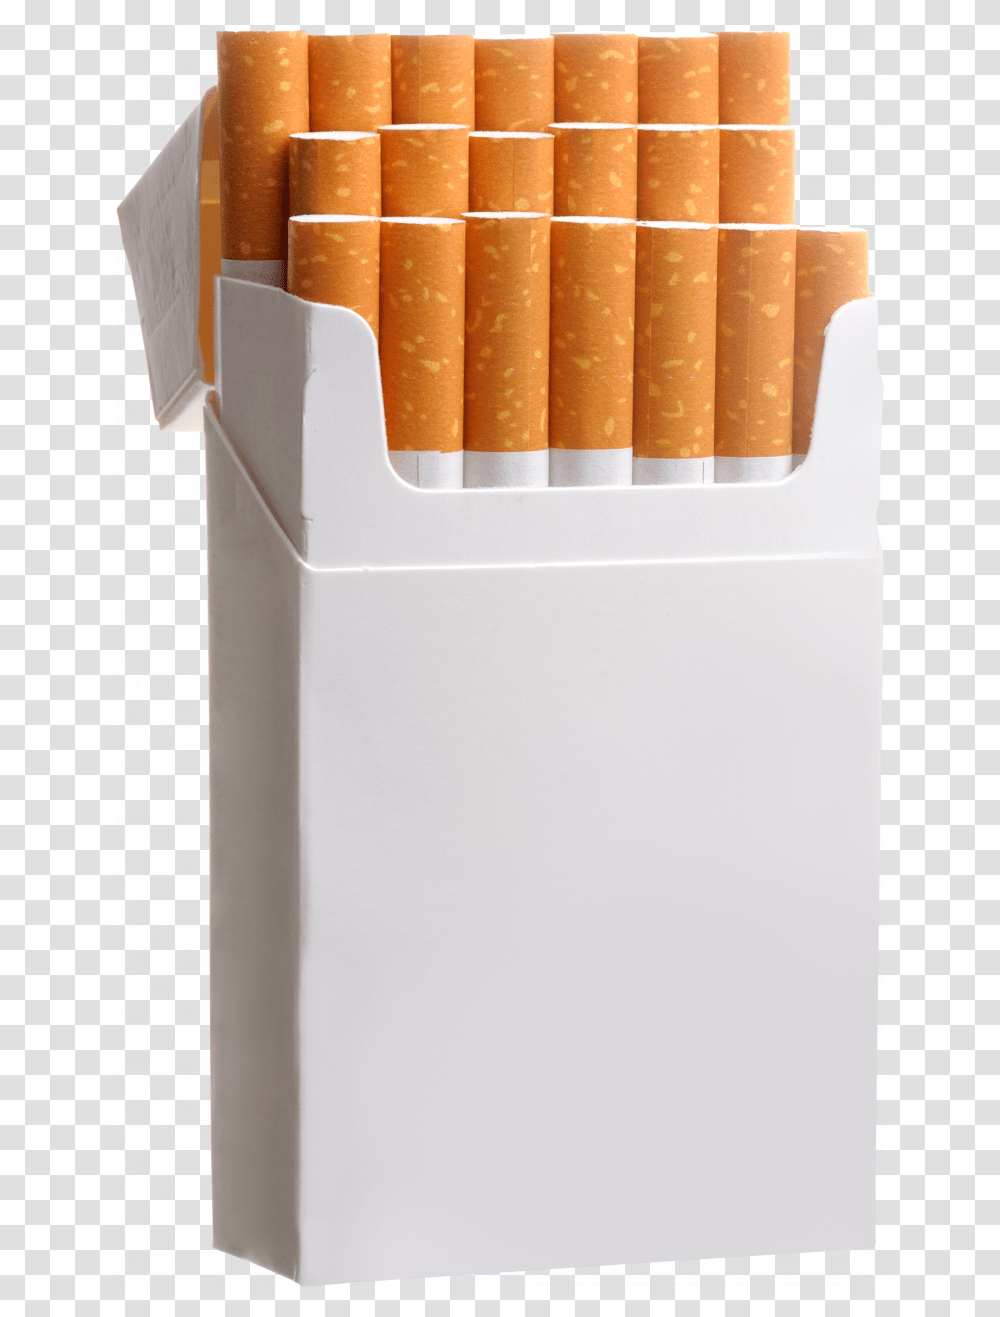 Download For Free Cigarette In High Resolution Cigarette Pack, Refrigerator, Appliance, Box, Food Transparent Png